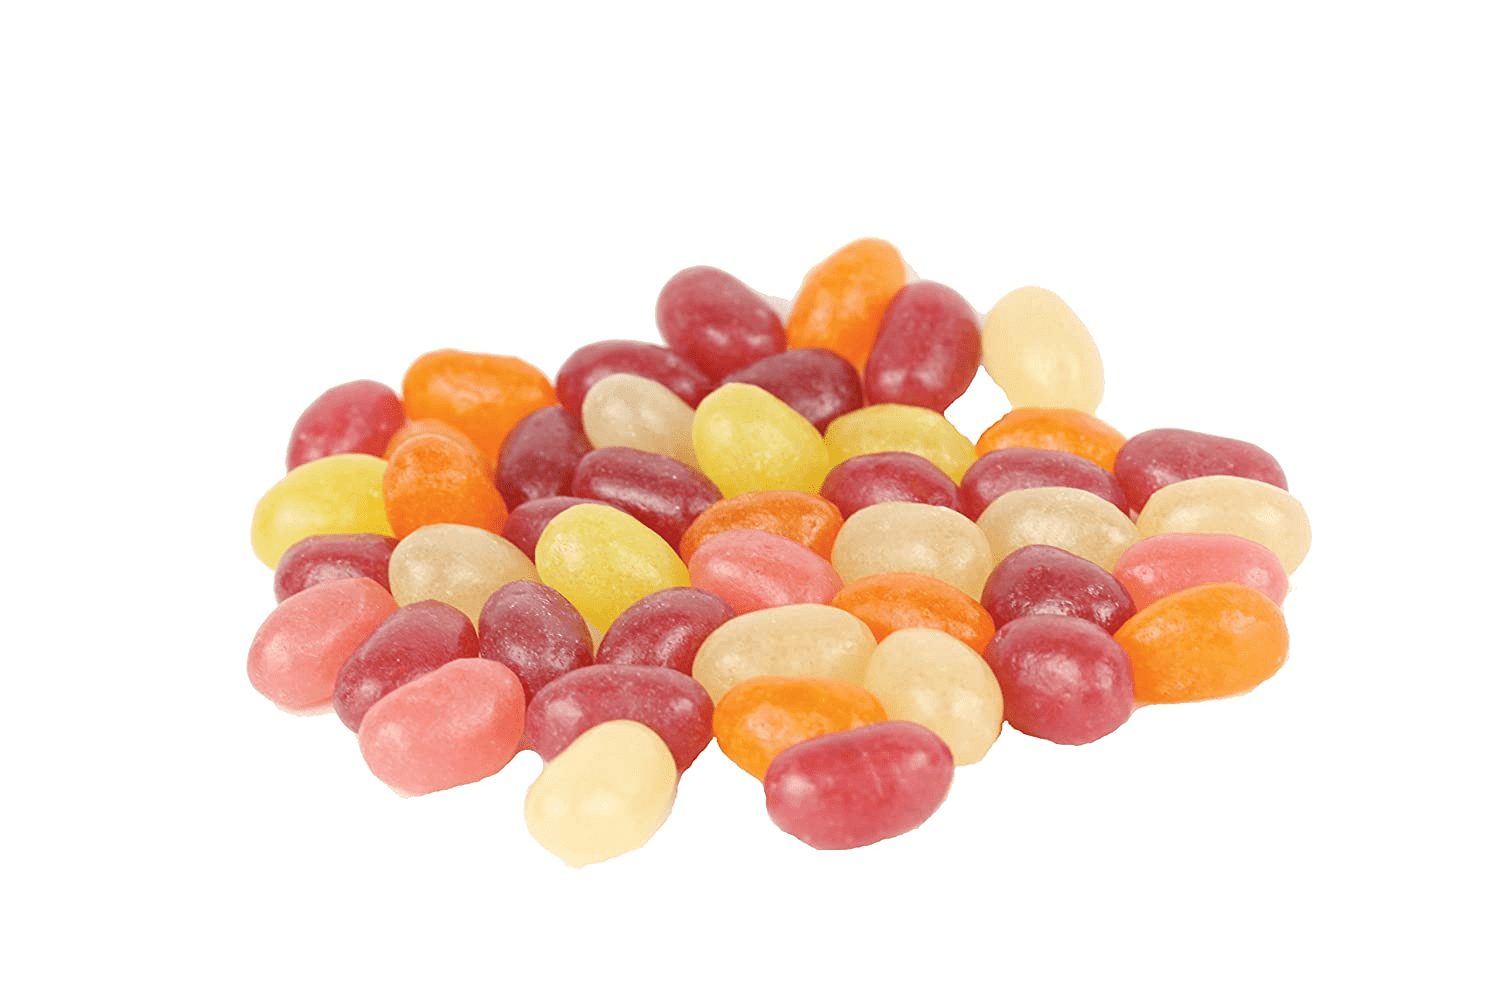 Surf Sweets Organic Jelly Beans 2 units per case 5.0 lbs